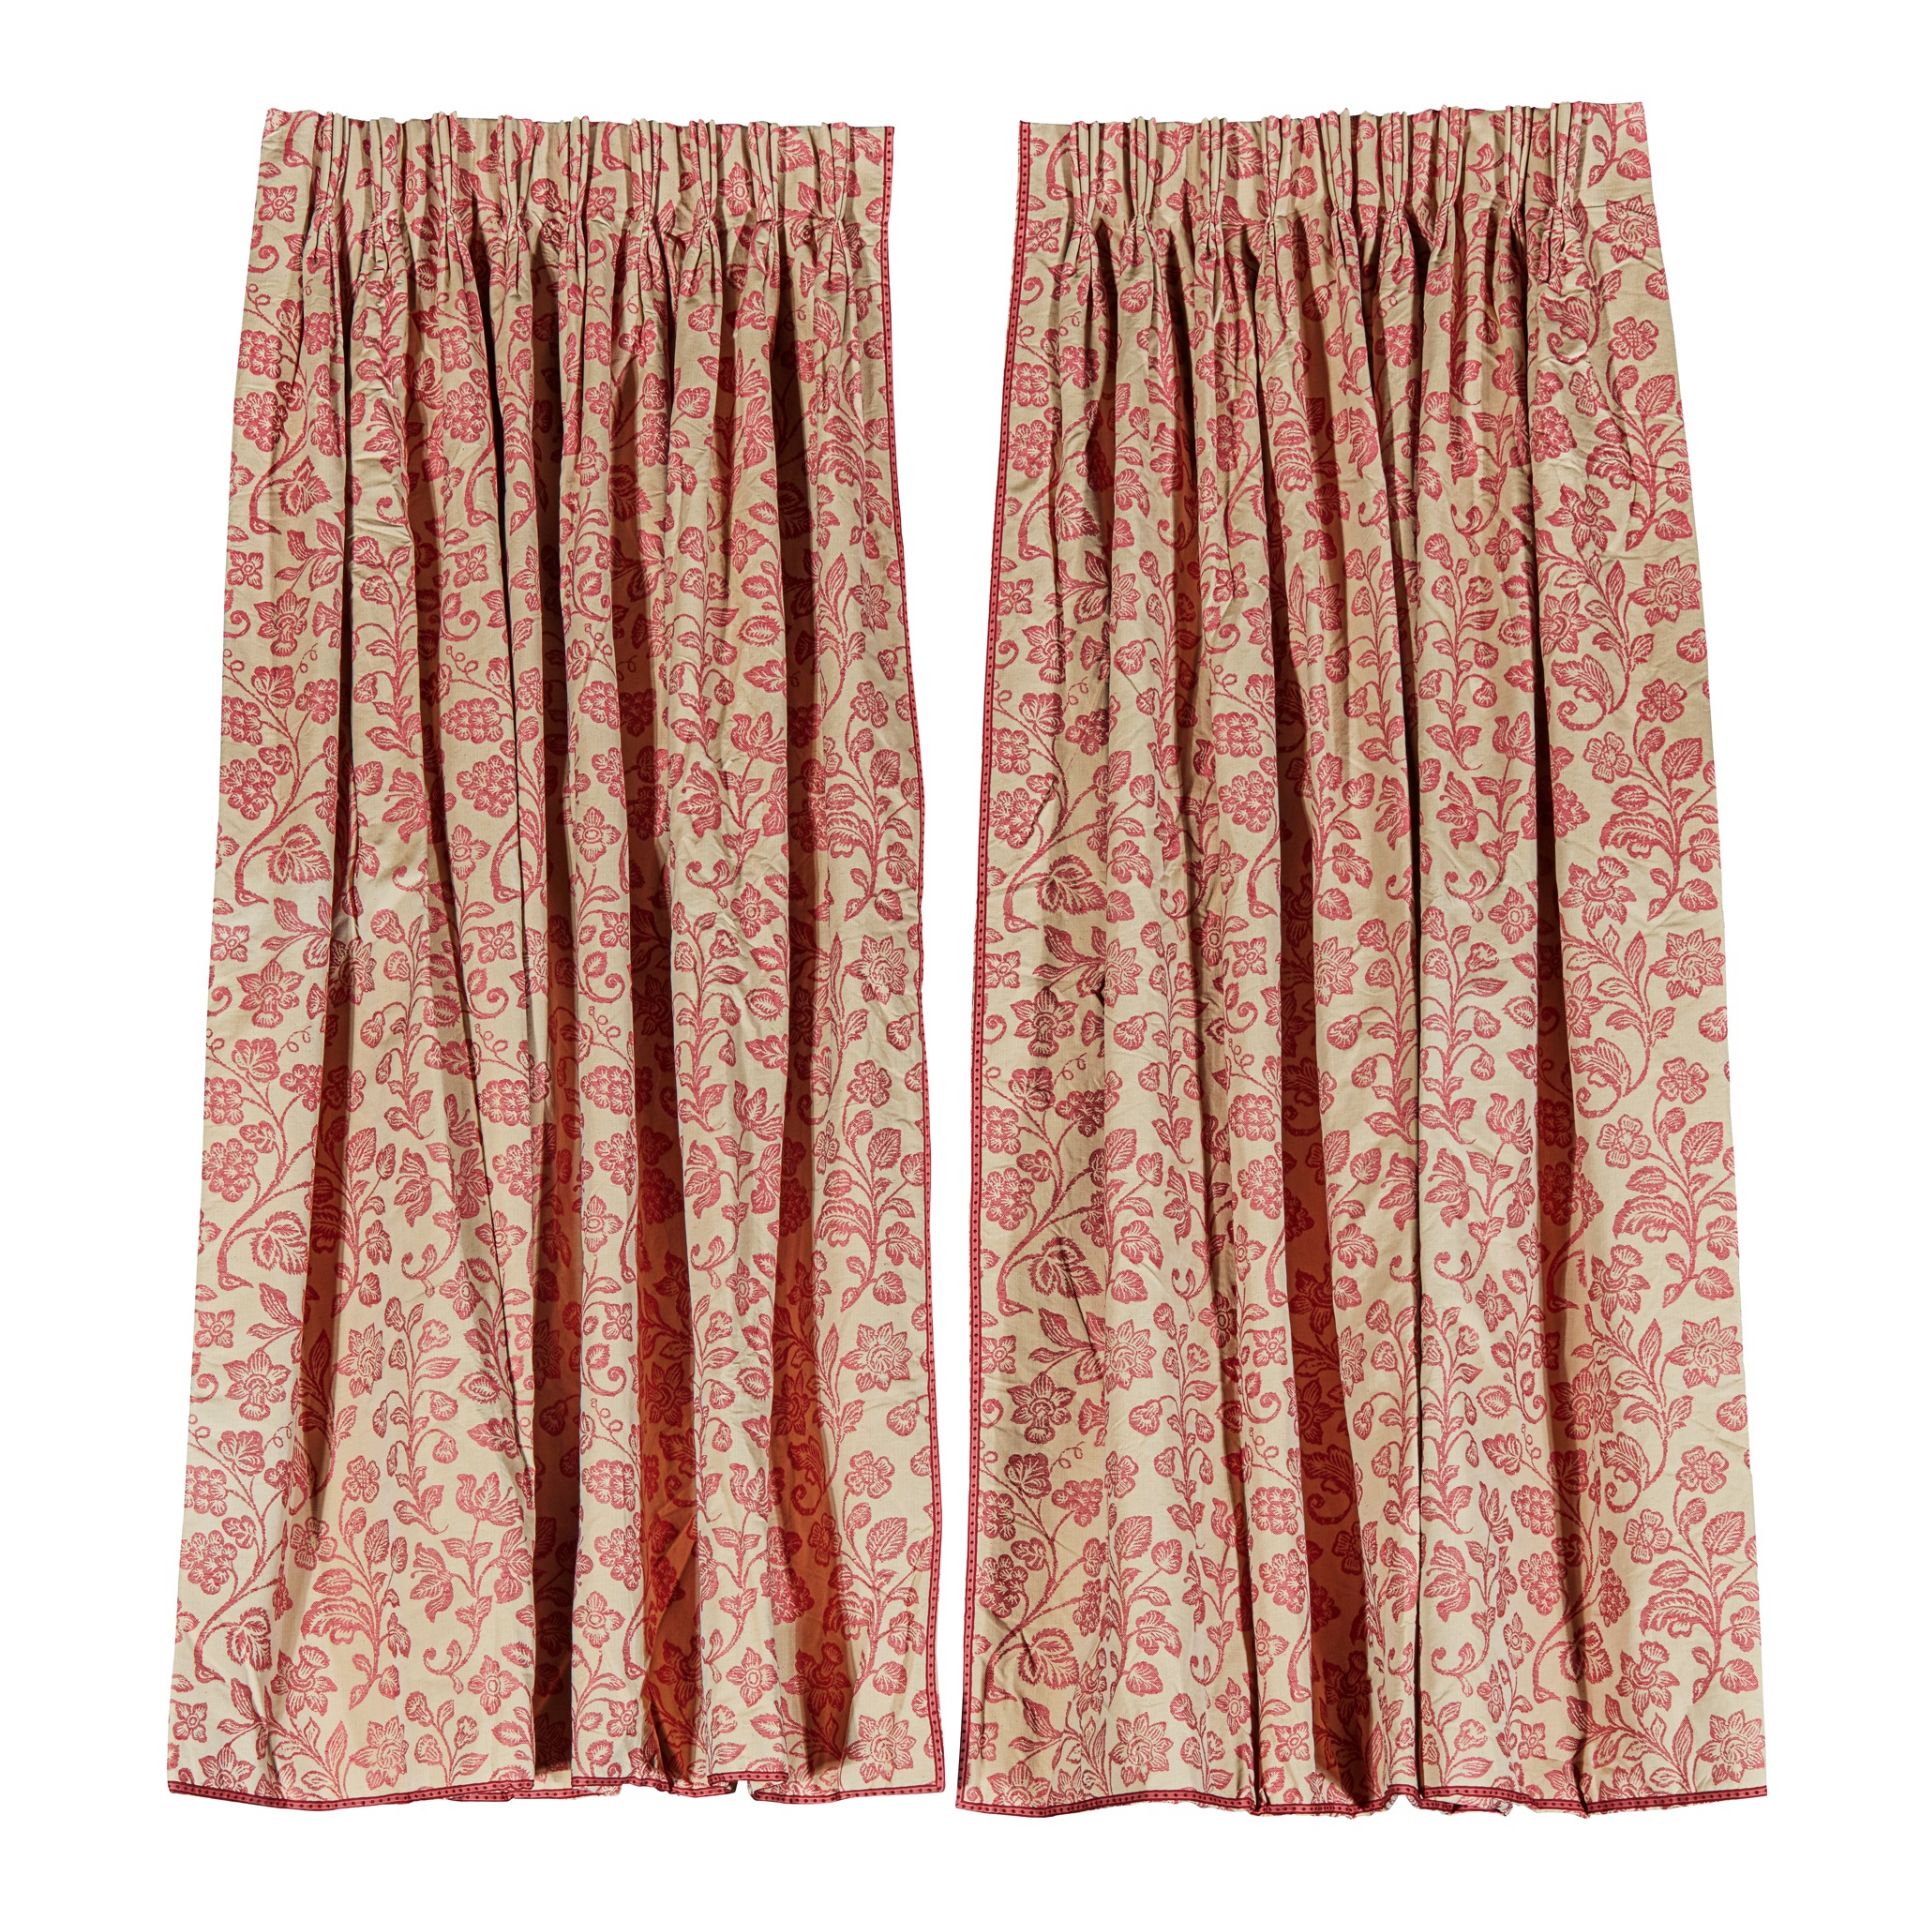 THREE PAIRS OF JACQUARD CURTAINS, BY COLEFAX & FOWLER MODERN